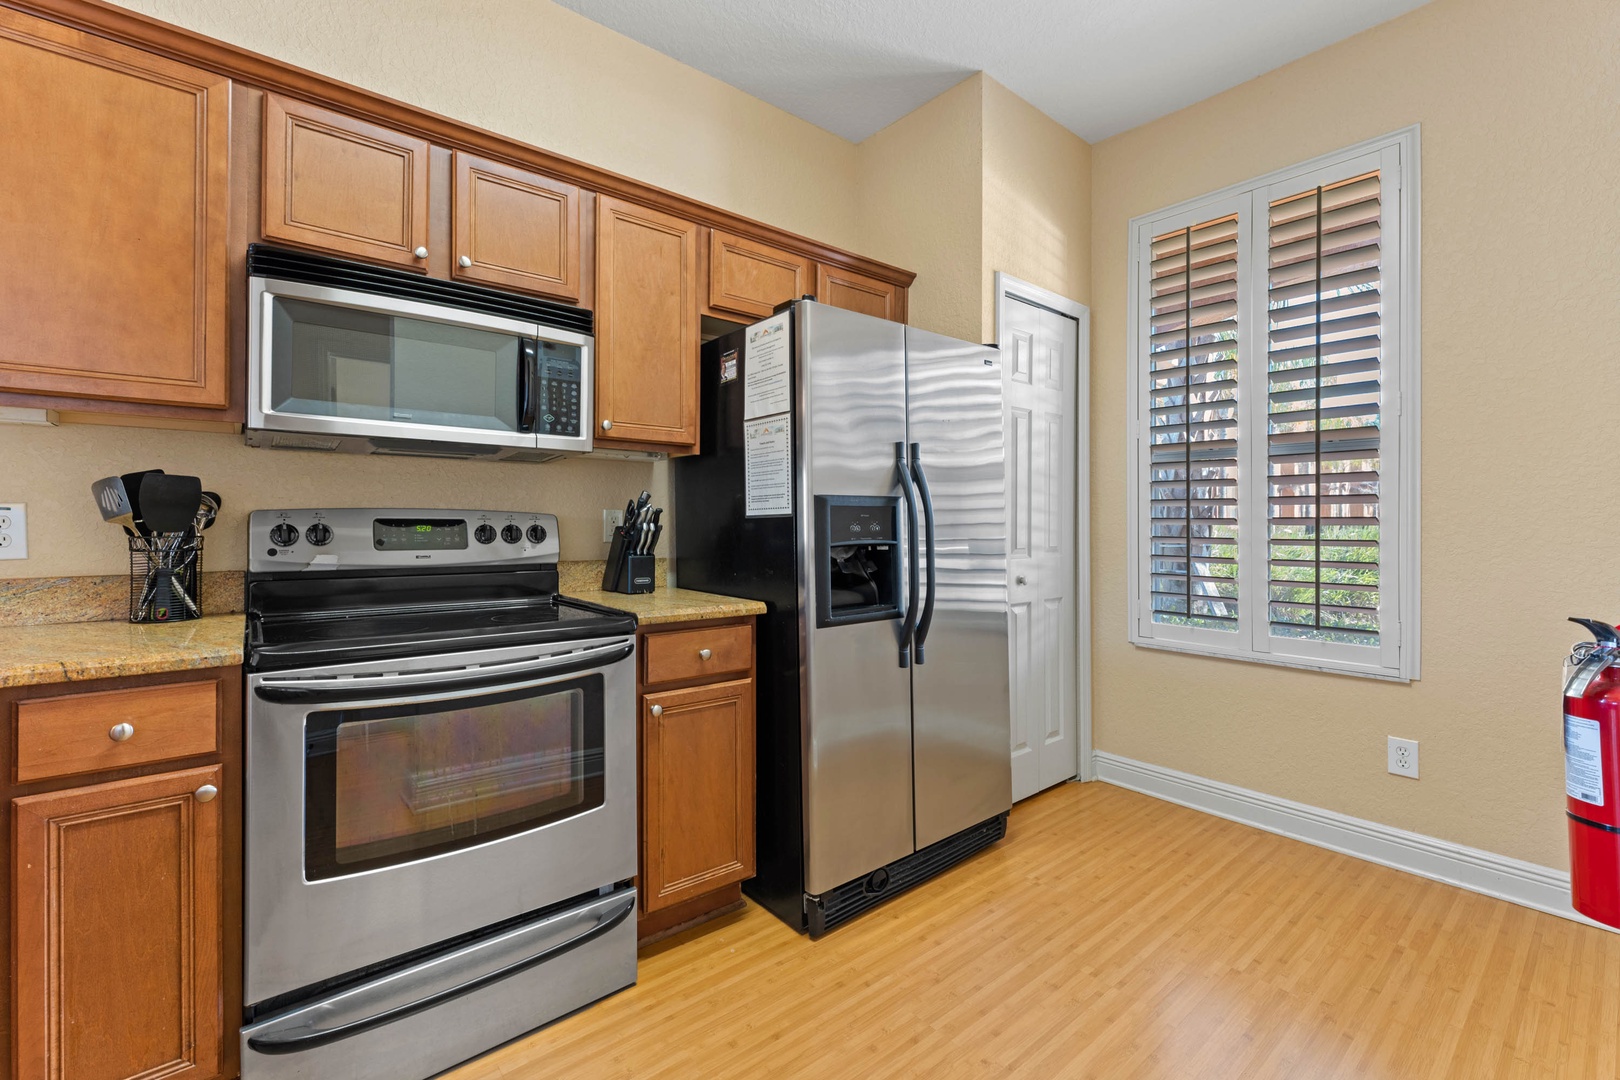 The updated kitchen offers loads of space & all the comforts of home